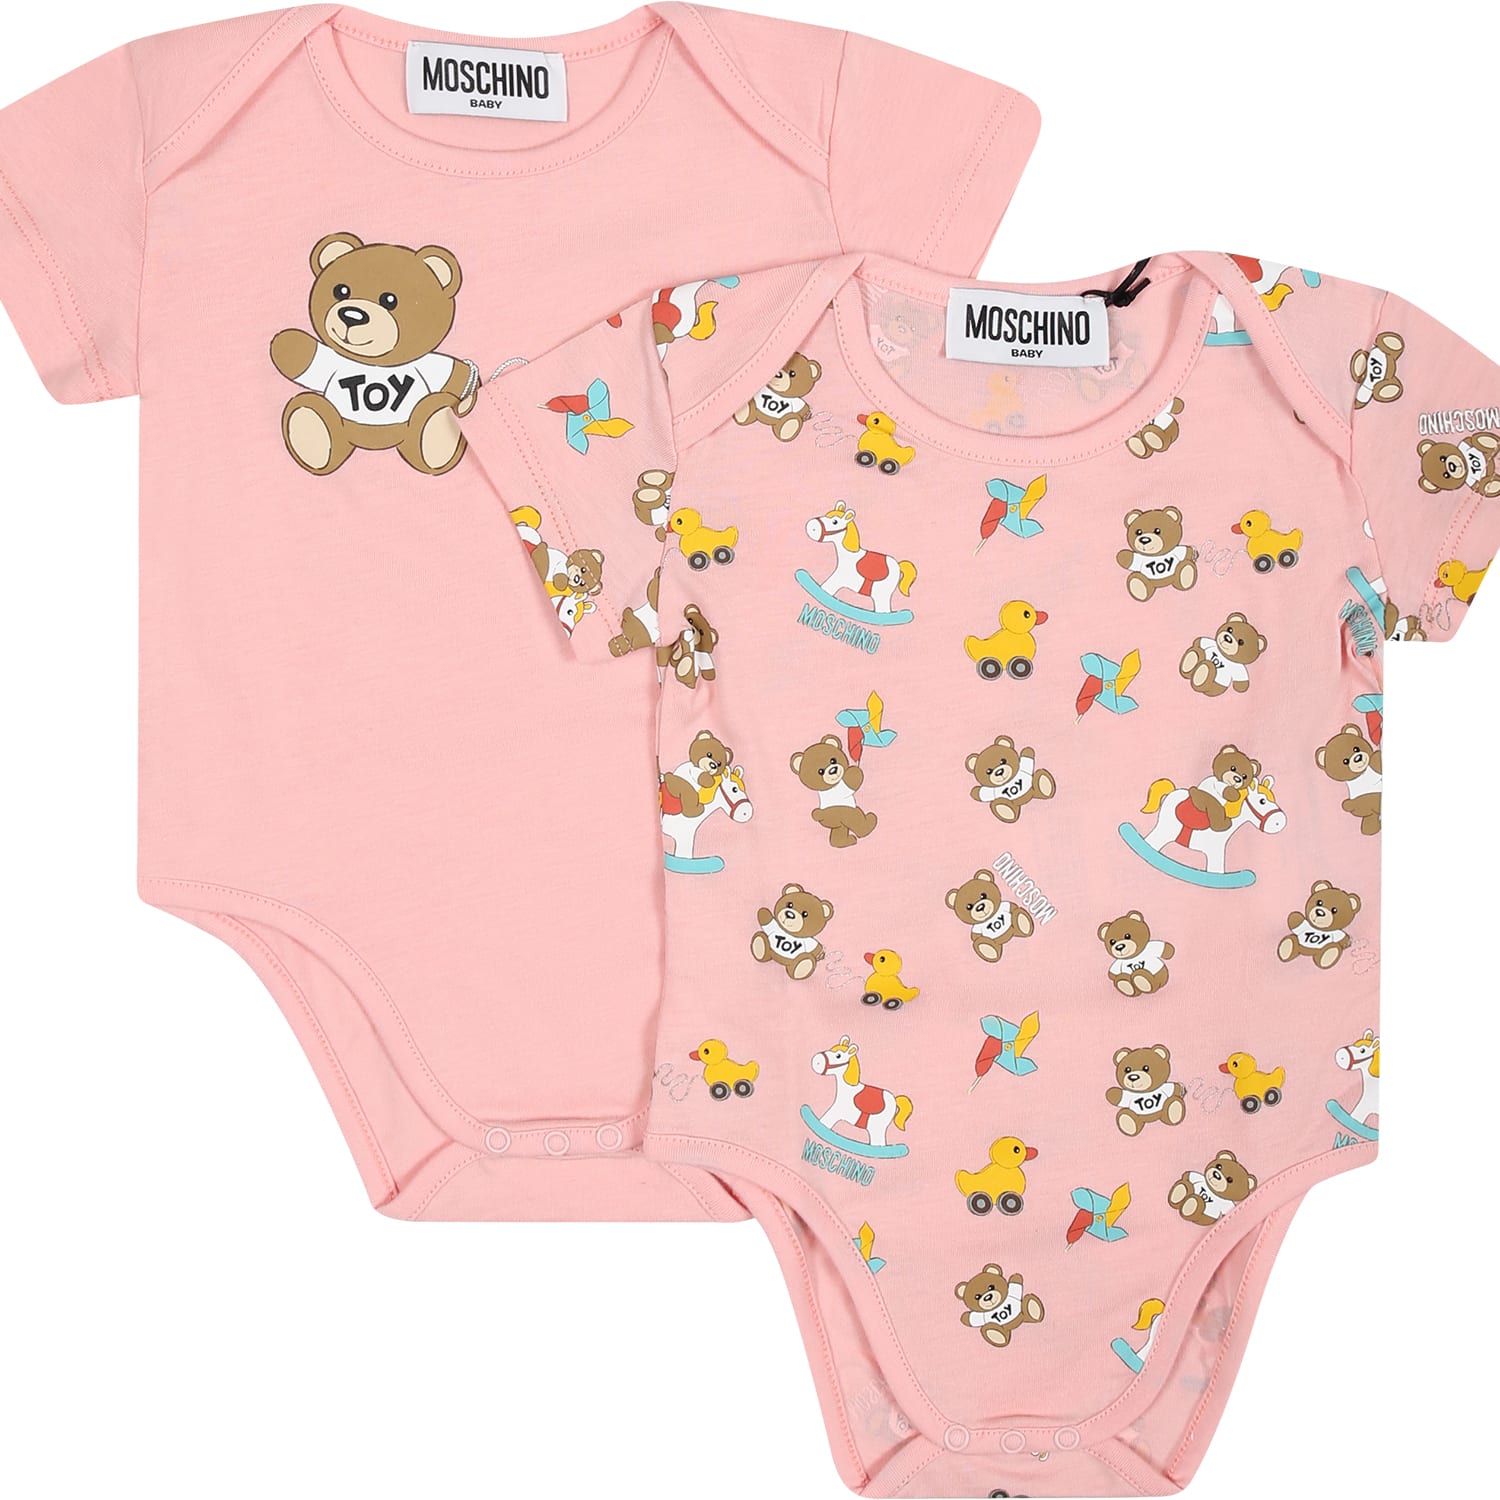 Moschino Pink Set For Baby Girl With Teddy Bear